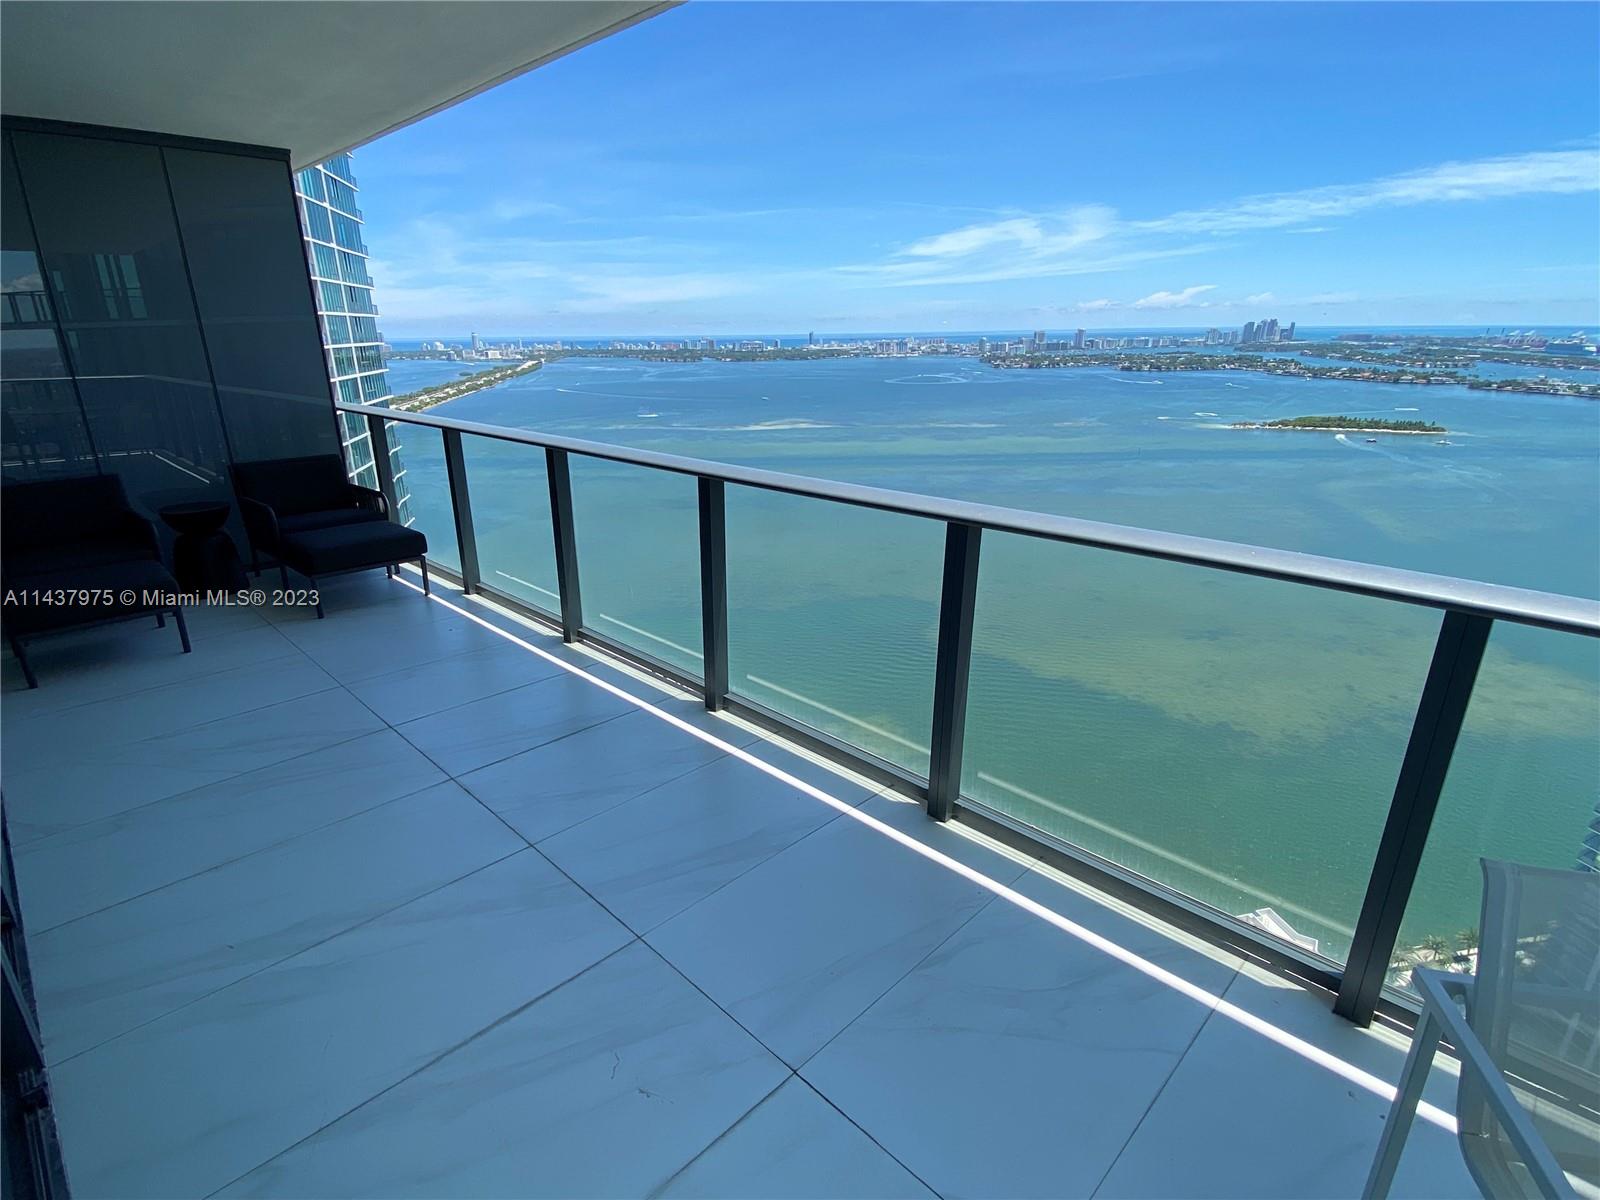 Breathtaking views from the 46th floor!!! Must see to appreciate this stunning 4 bedrooms, 4.5 bathrooms + den residence in the sky. Fully furnished and decorated by a professional Brazilian designer. The ultra desirable Paraiso Bay condominium features top notch amenities and lounge areas such as a large swimming pool, spa, tennis court, cigar room, pool table, sauna, gym and so much more!